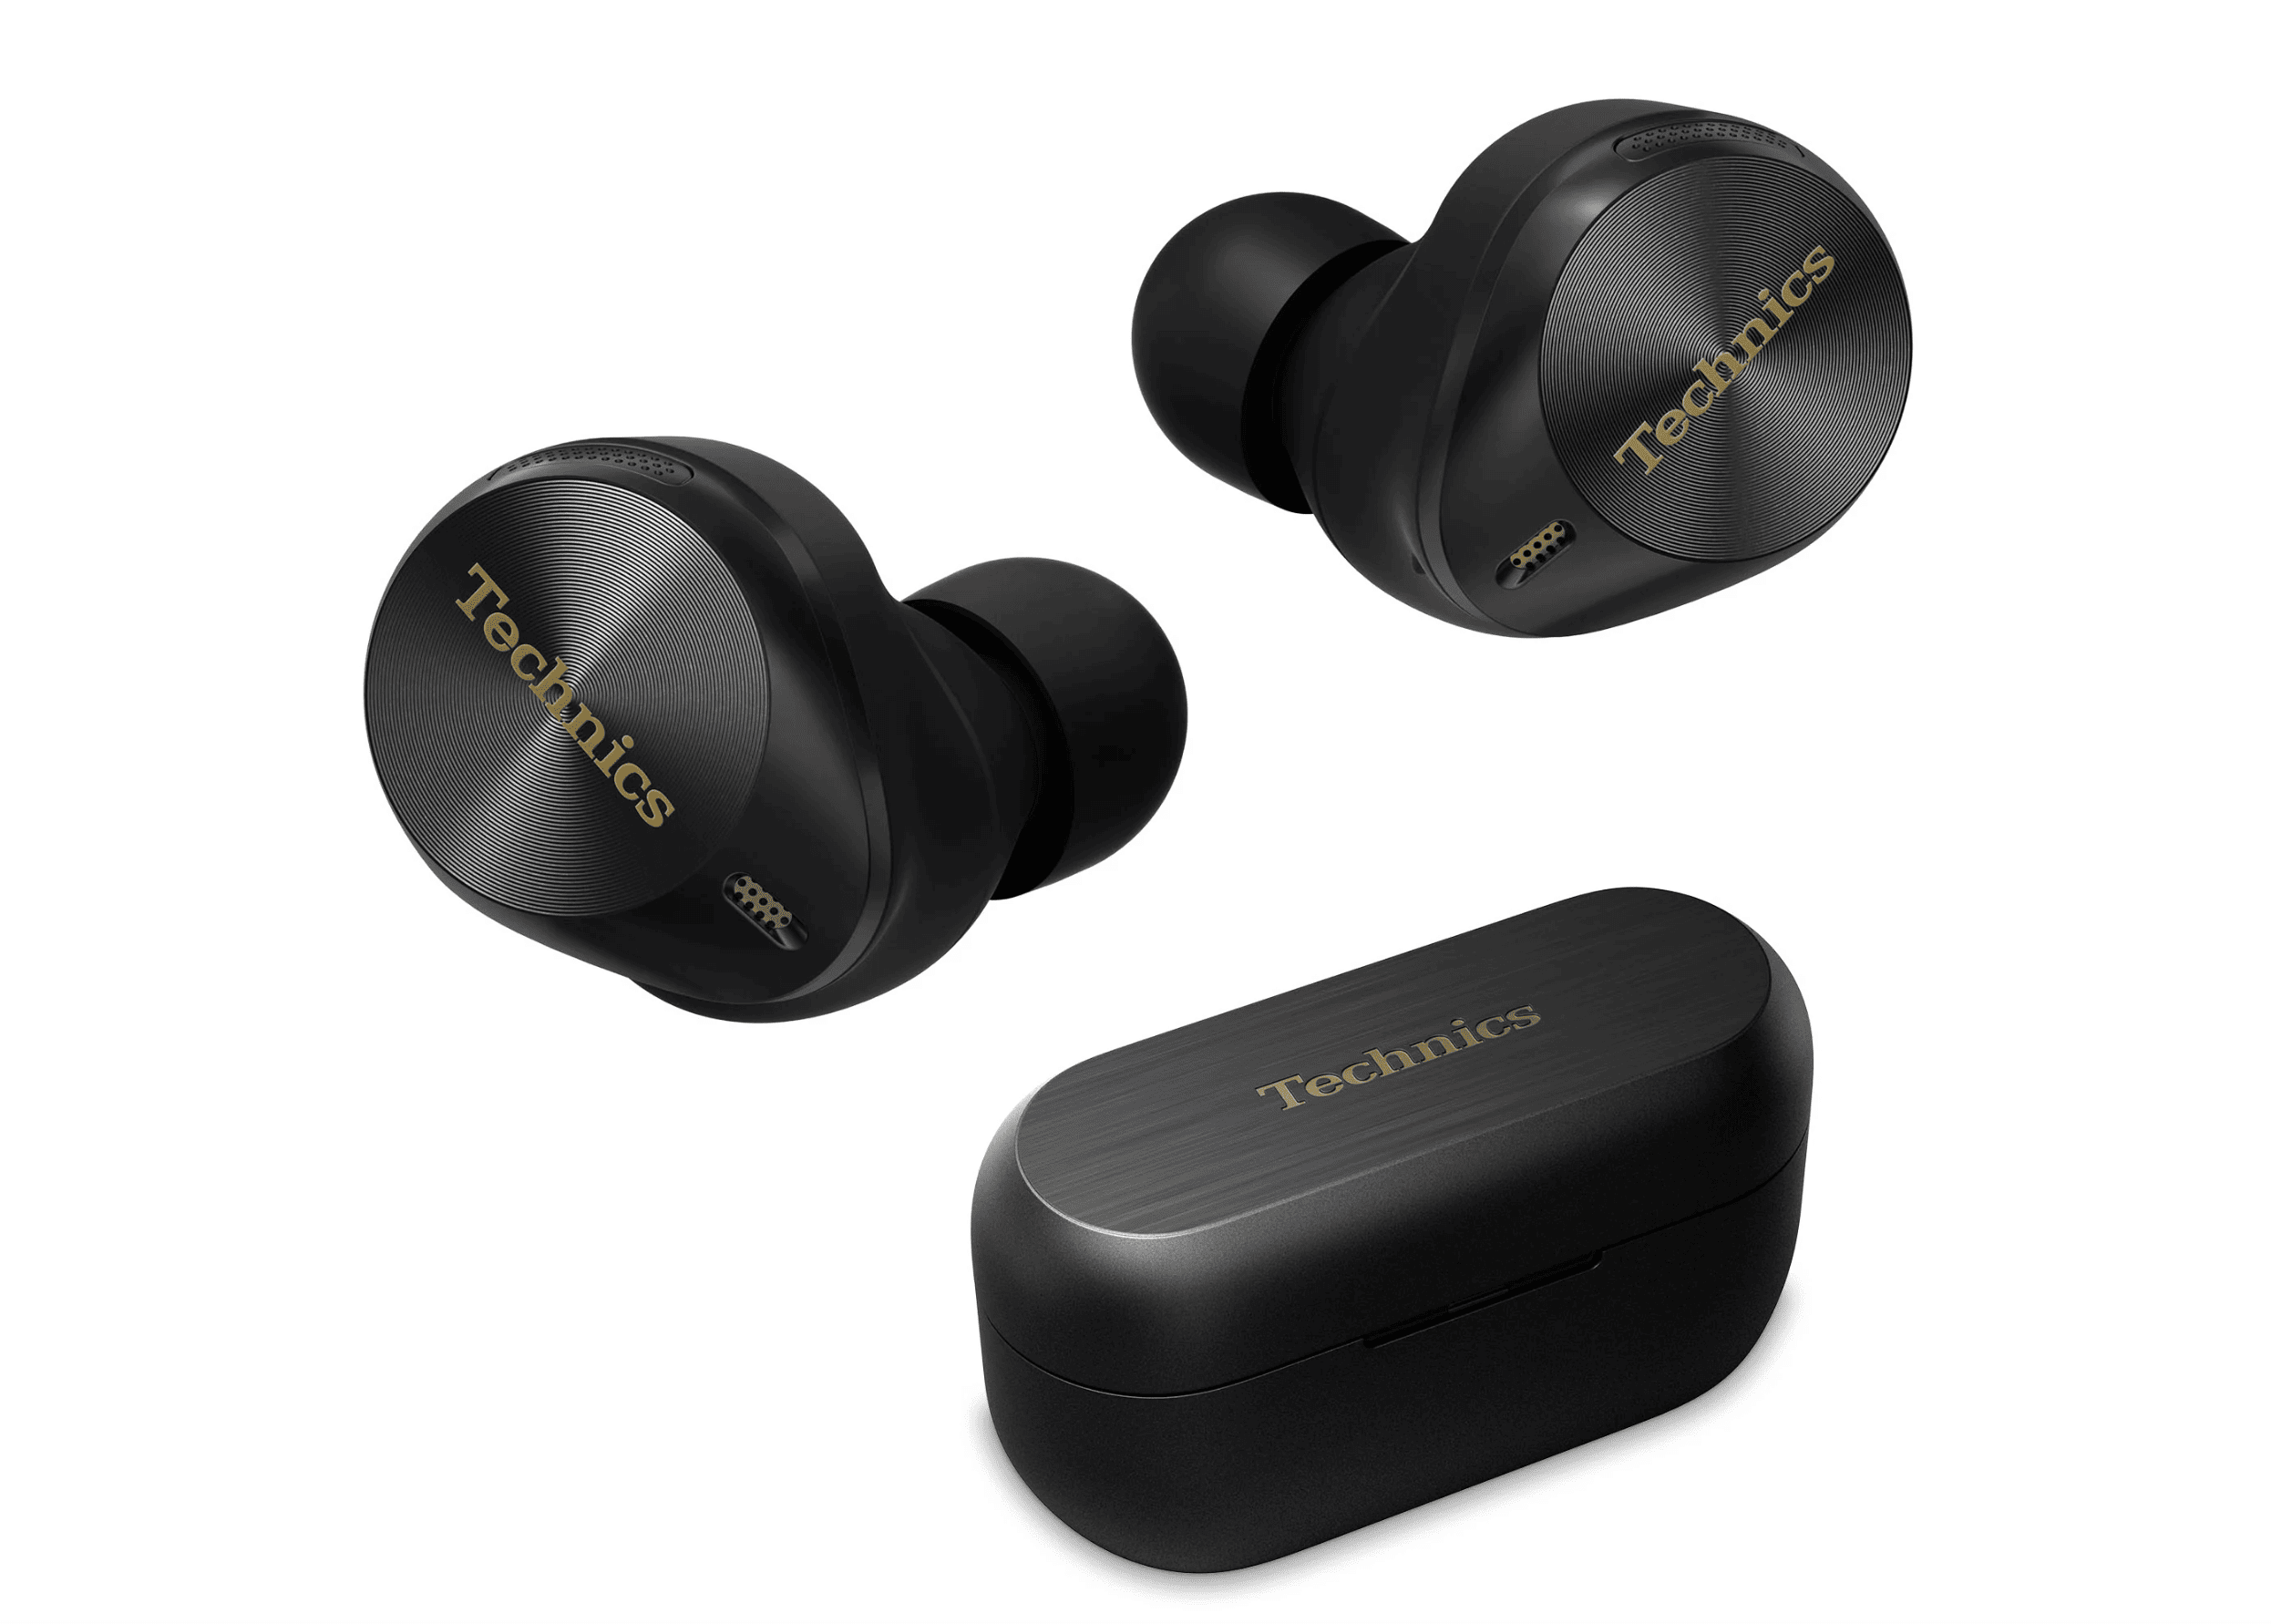 Technics launches new and improved wireless earbuds